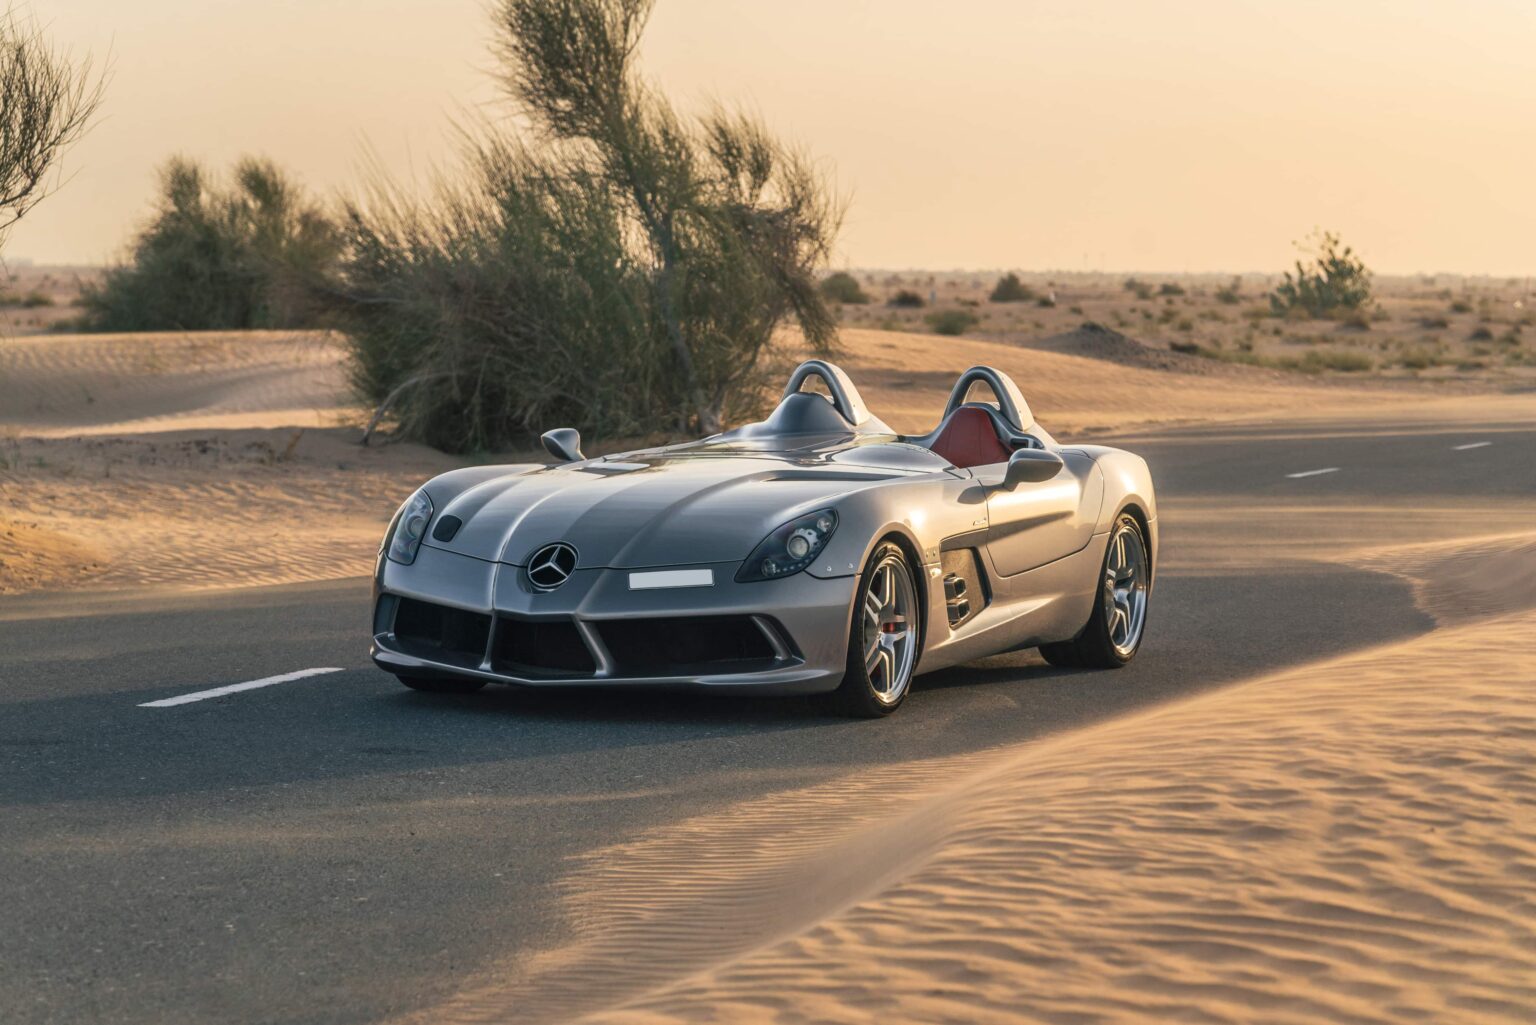 the Mercedes-Benz SLR McLaren Stirling Moss, reaching 219mph, now priced at £2.7 million. With only 75 ever made, it's a rare gem. Inspired by Sir Stirling Moss’ 1955 Mille Miglia victory, its design pays homage to motorsport history. Despite its rarity, it has tripled in value, now auctioned by RM Sotheby’s.